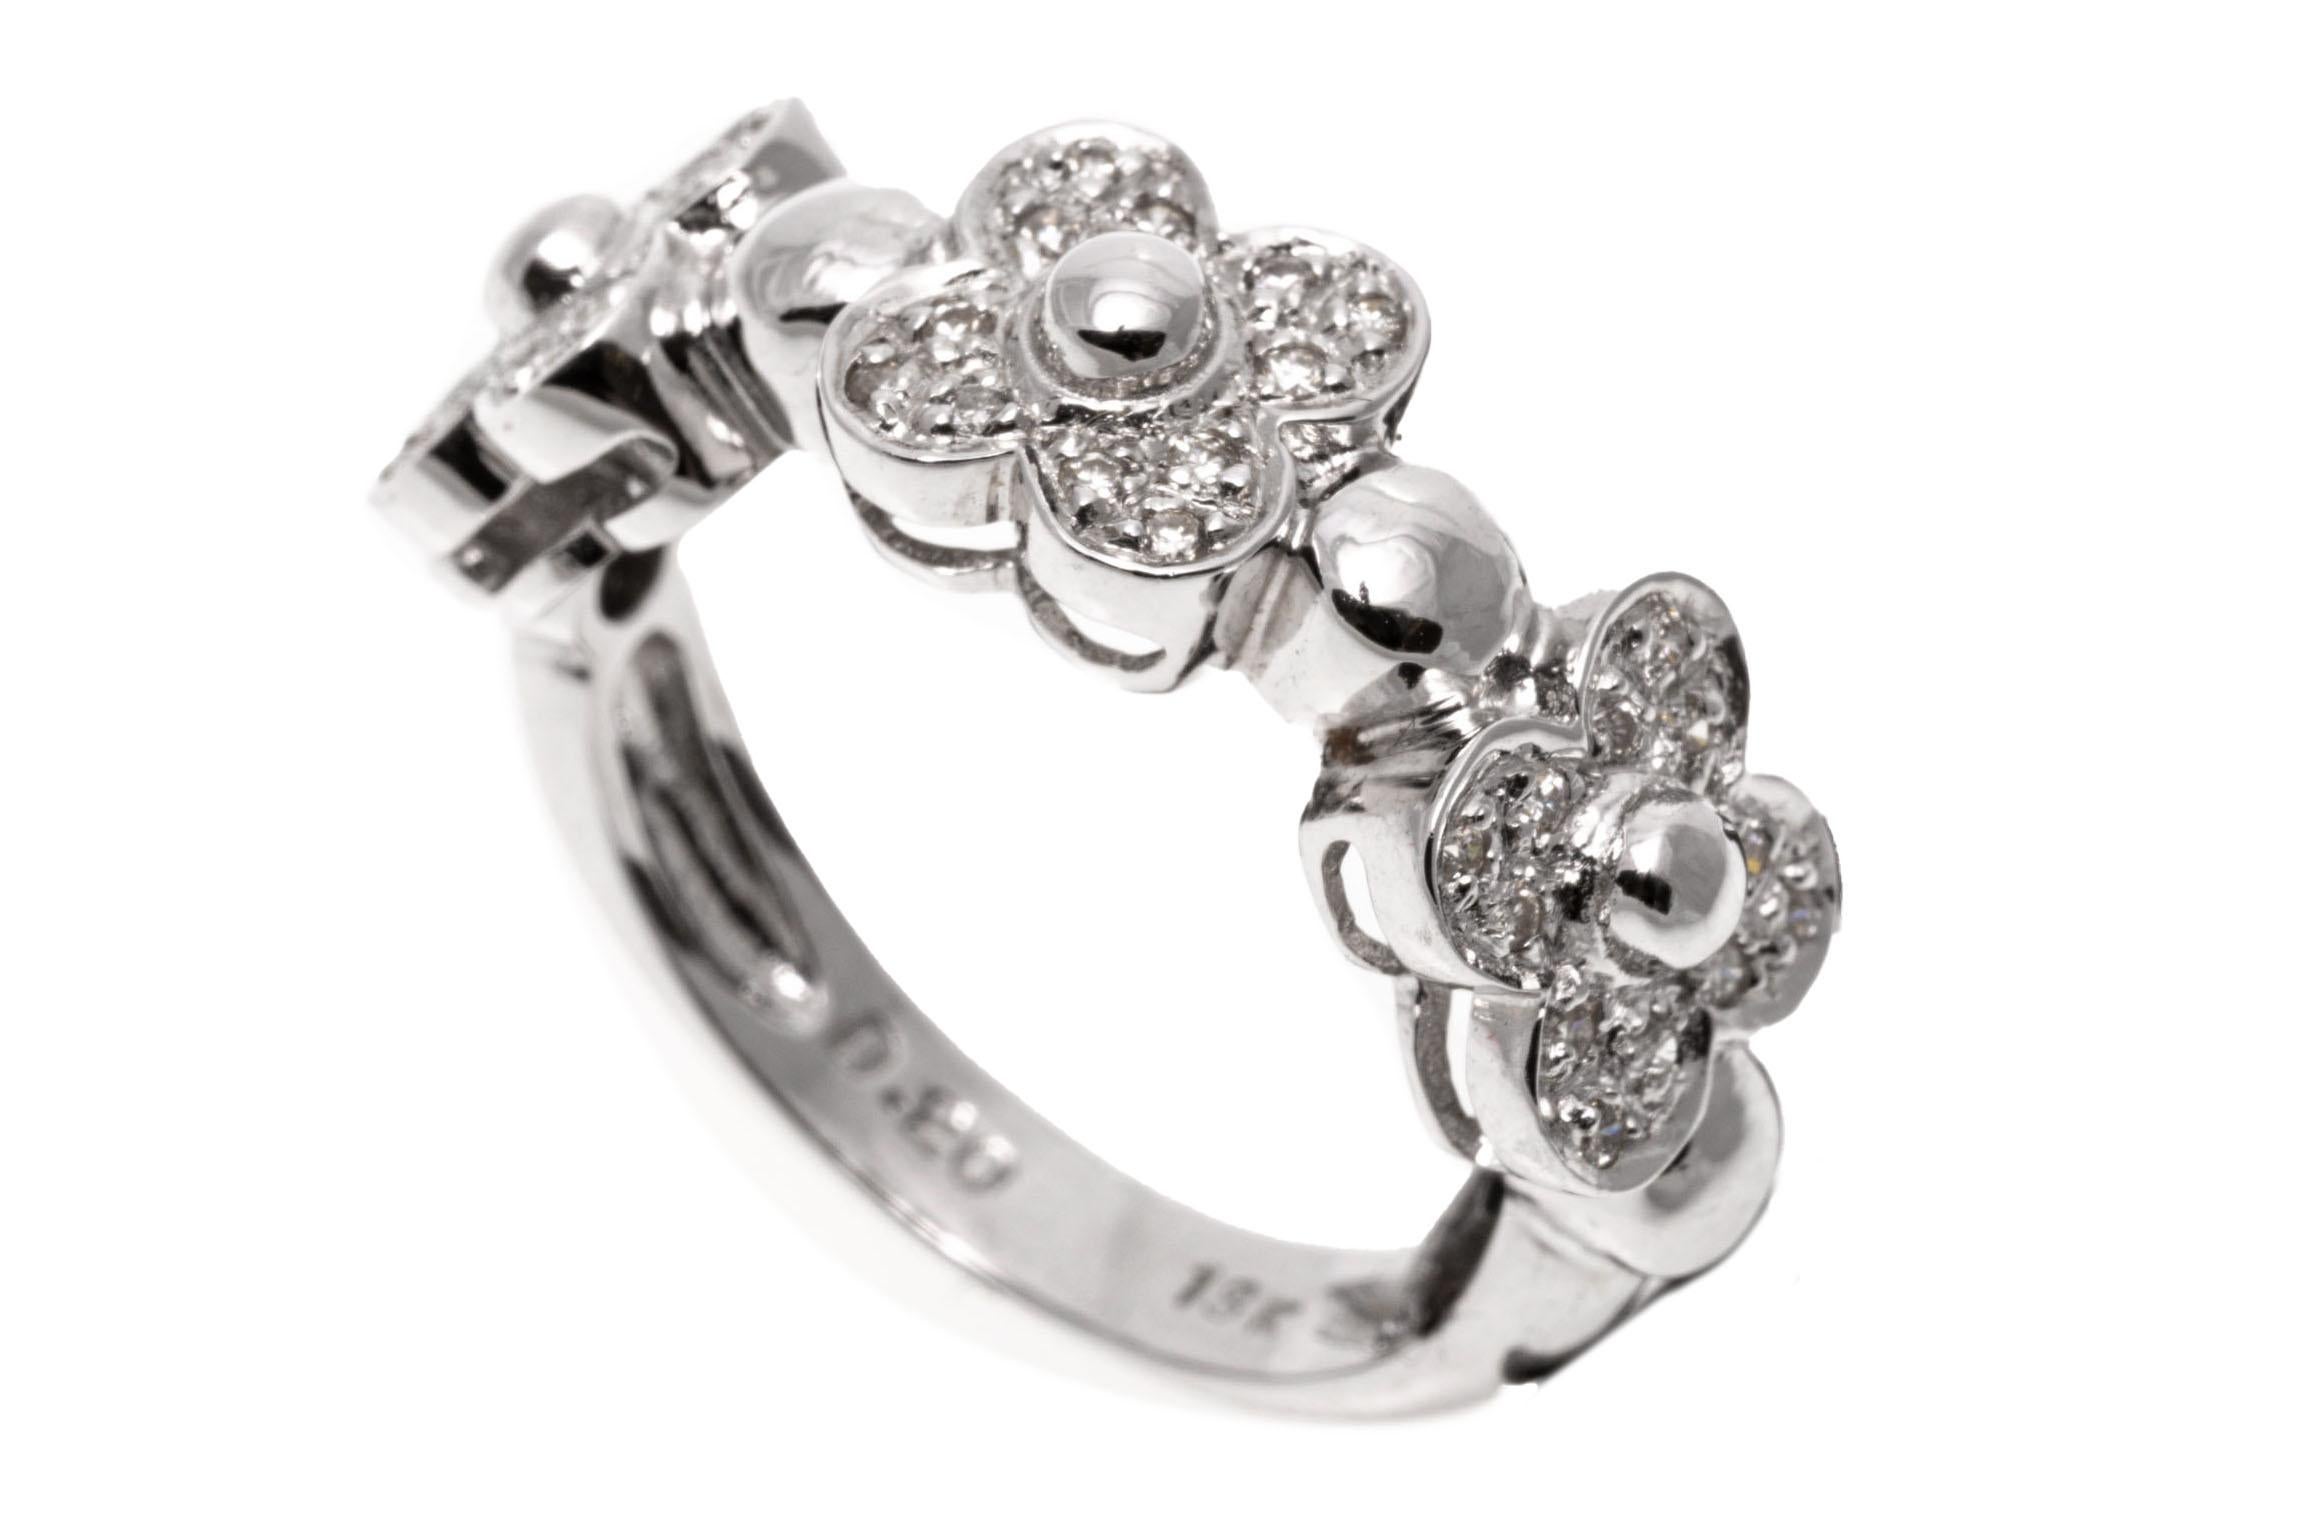 18k White Gold Quatrefoil Flower Motif Band Ring With Pave Diamonds, Size 6.75 For Sale 1